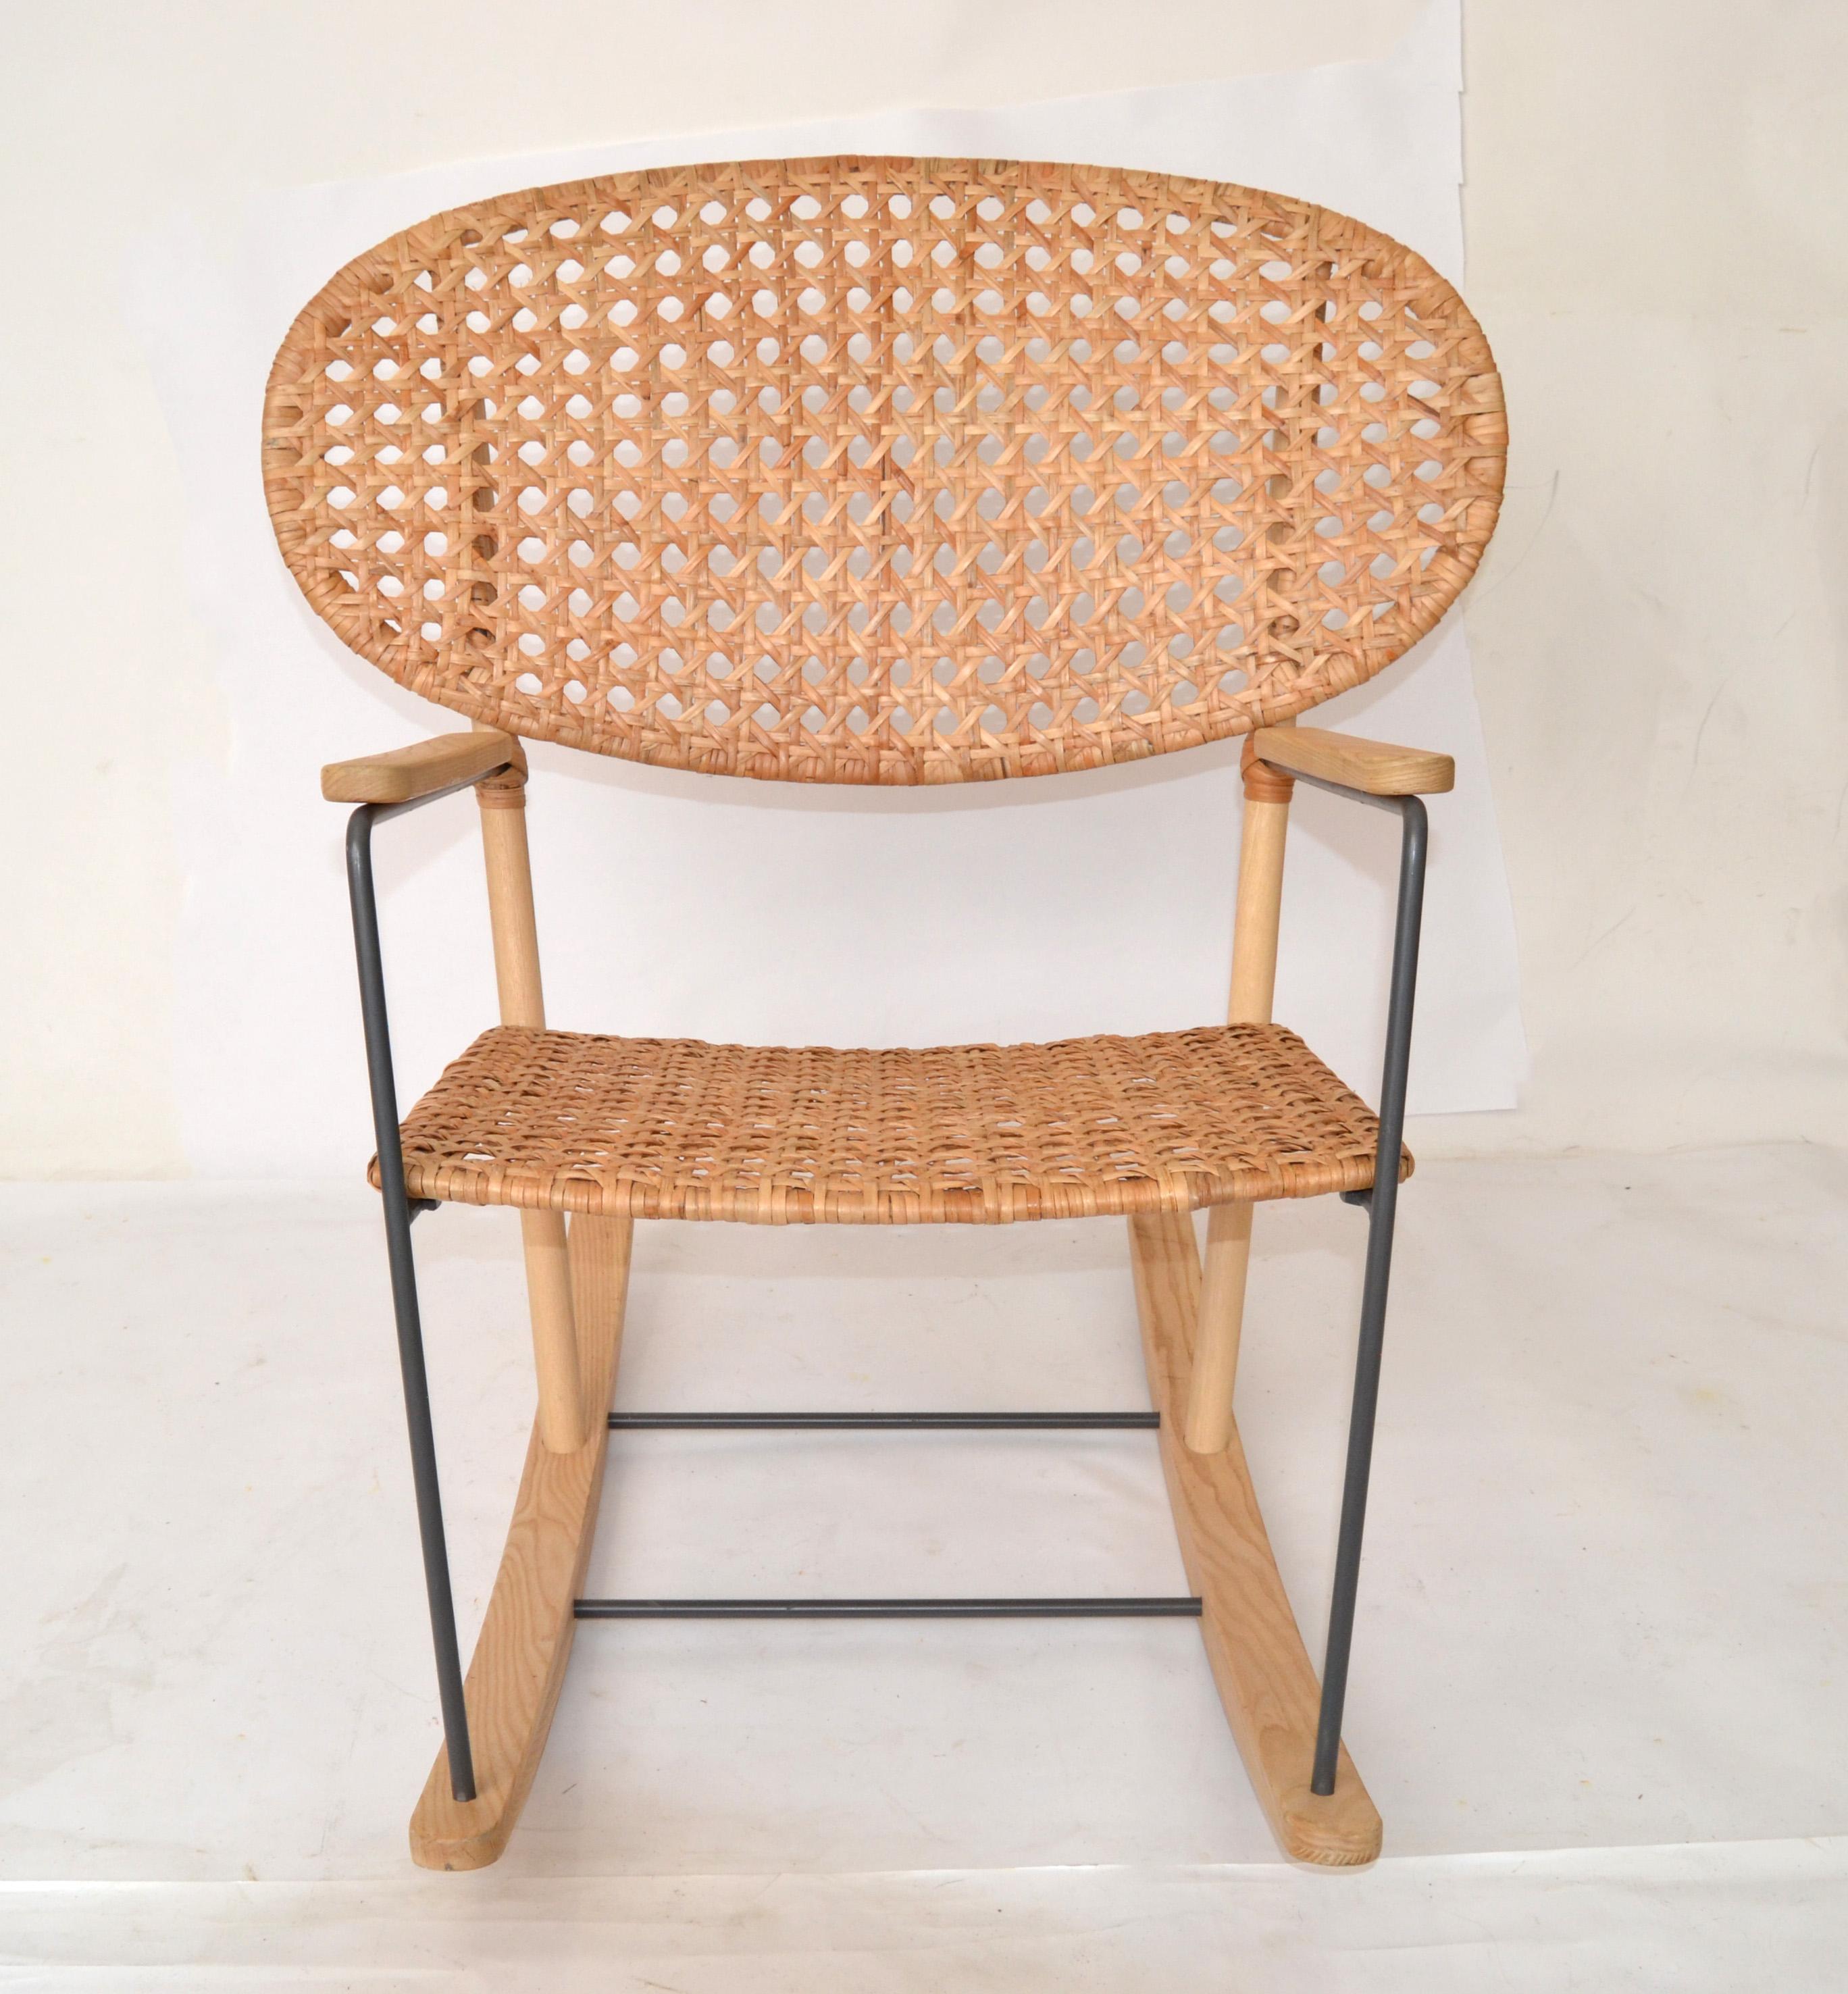 Scandinavian Modern rocking armchair made out of solid ash, steel frame and natural rattan weaving.
This rocking chair is a lightweight rocker made from handwoven rattan and ash colored wood. This airy rocker embodies modern Scandinavian design